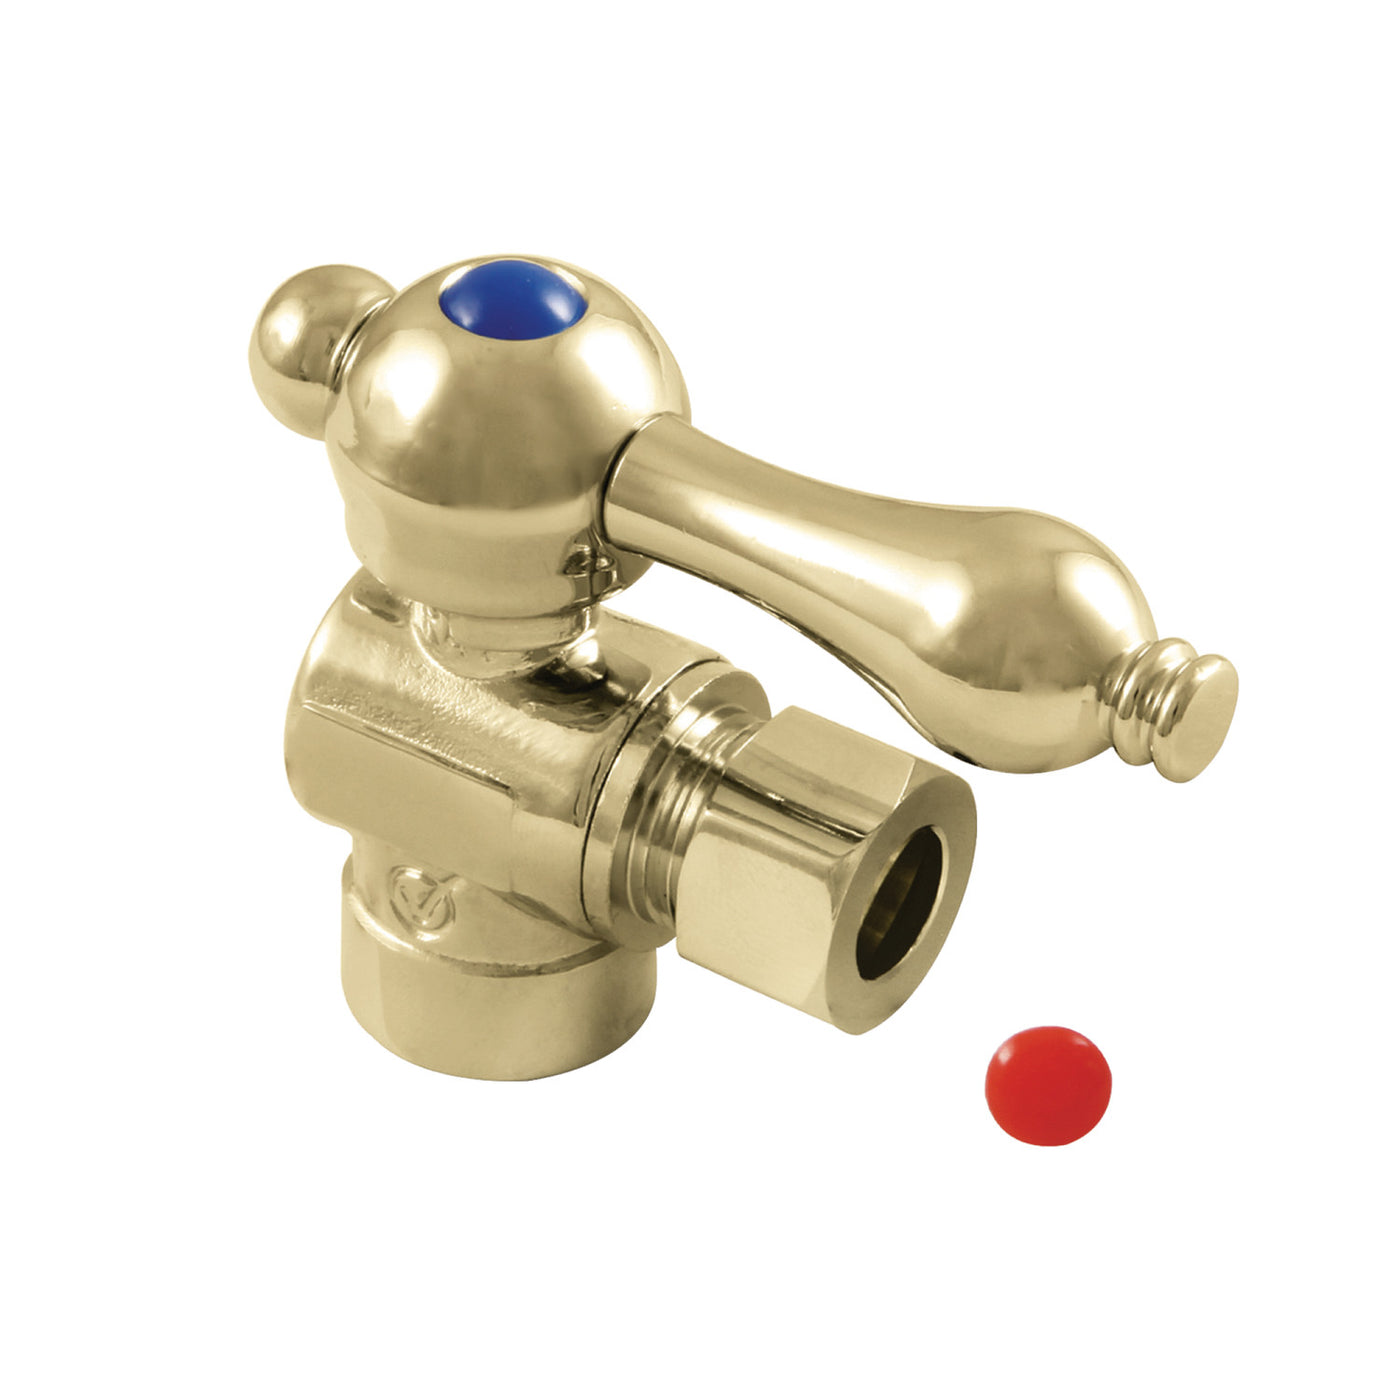 Elements of Design ECC43202 1/2-Inch Sweat x 3/8-Inch OD Comp Angle Stop Valve, Polished Brass